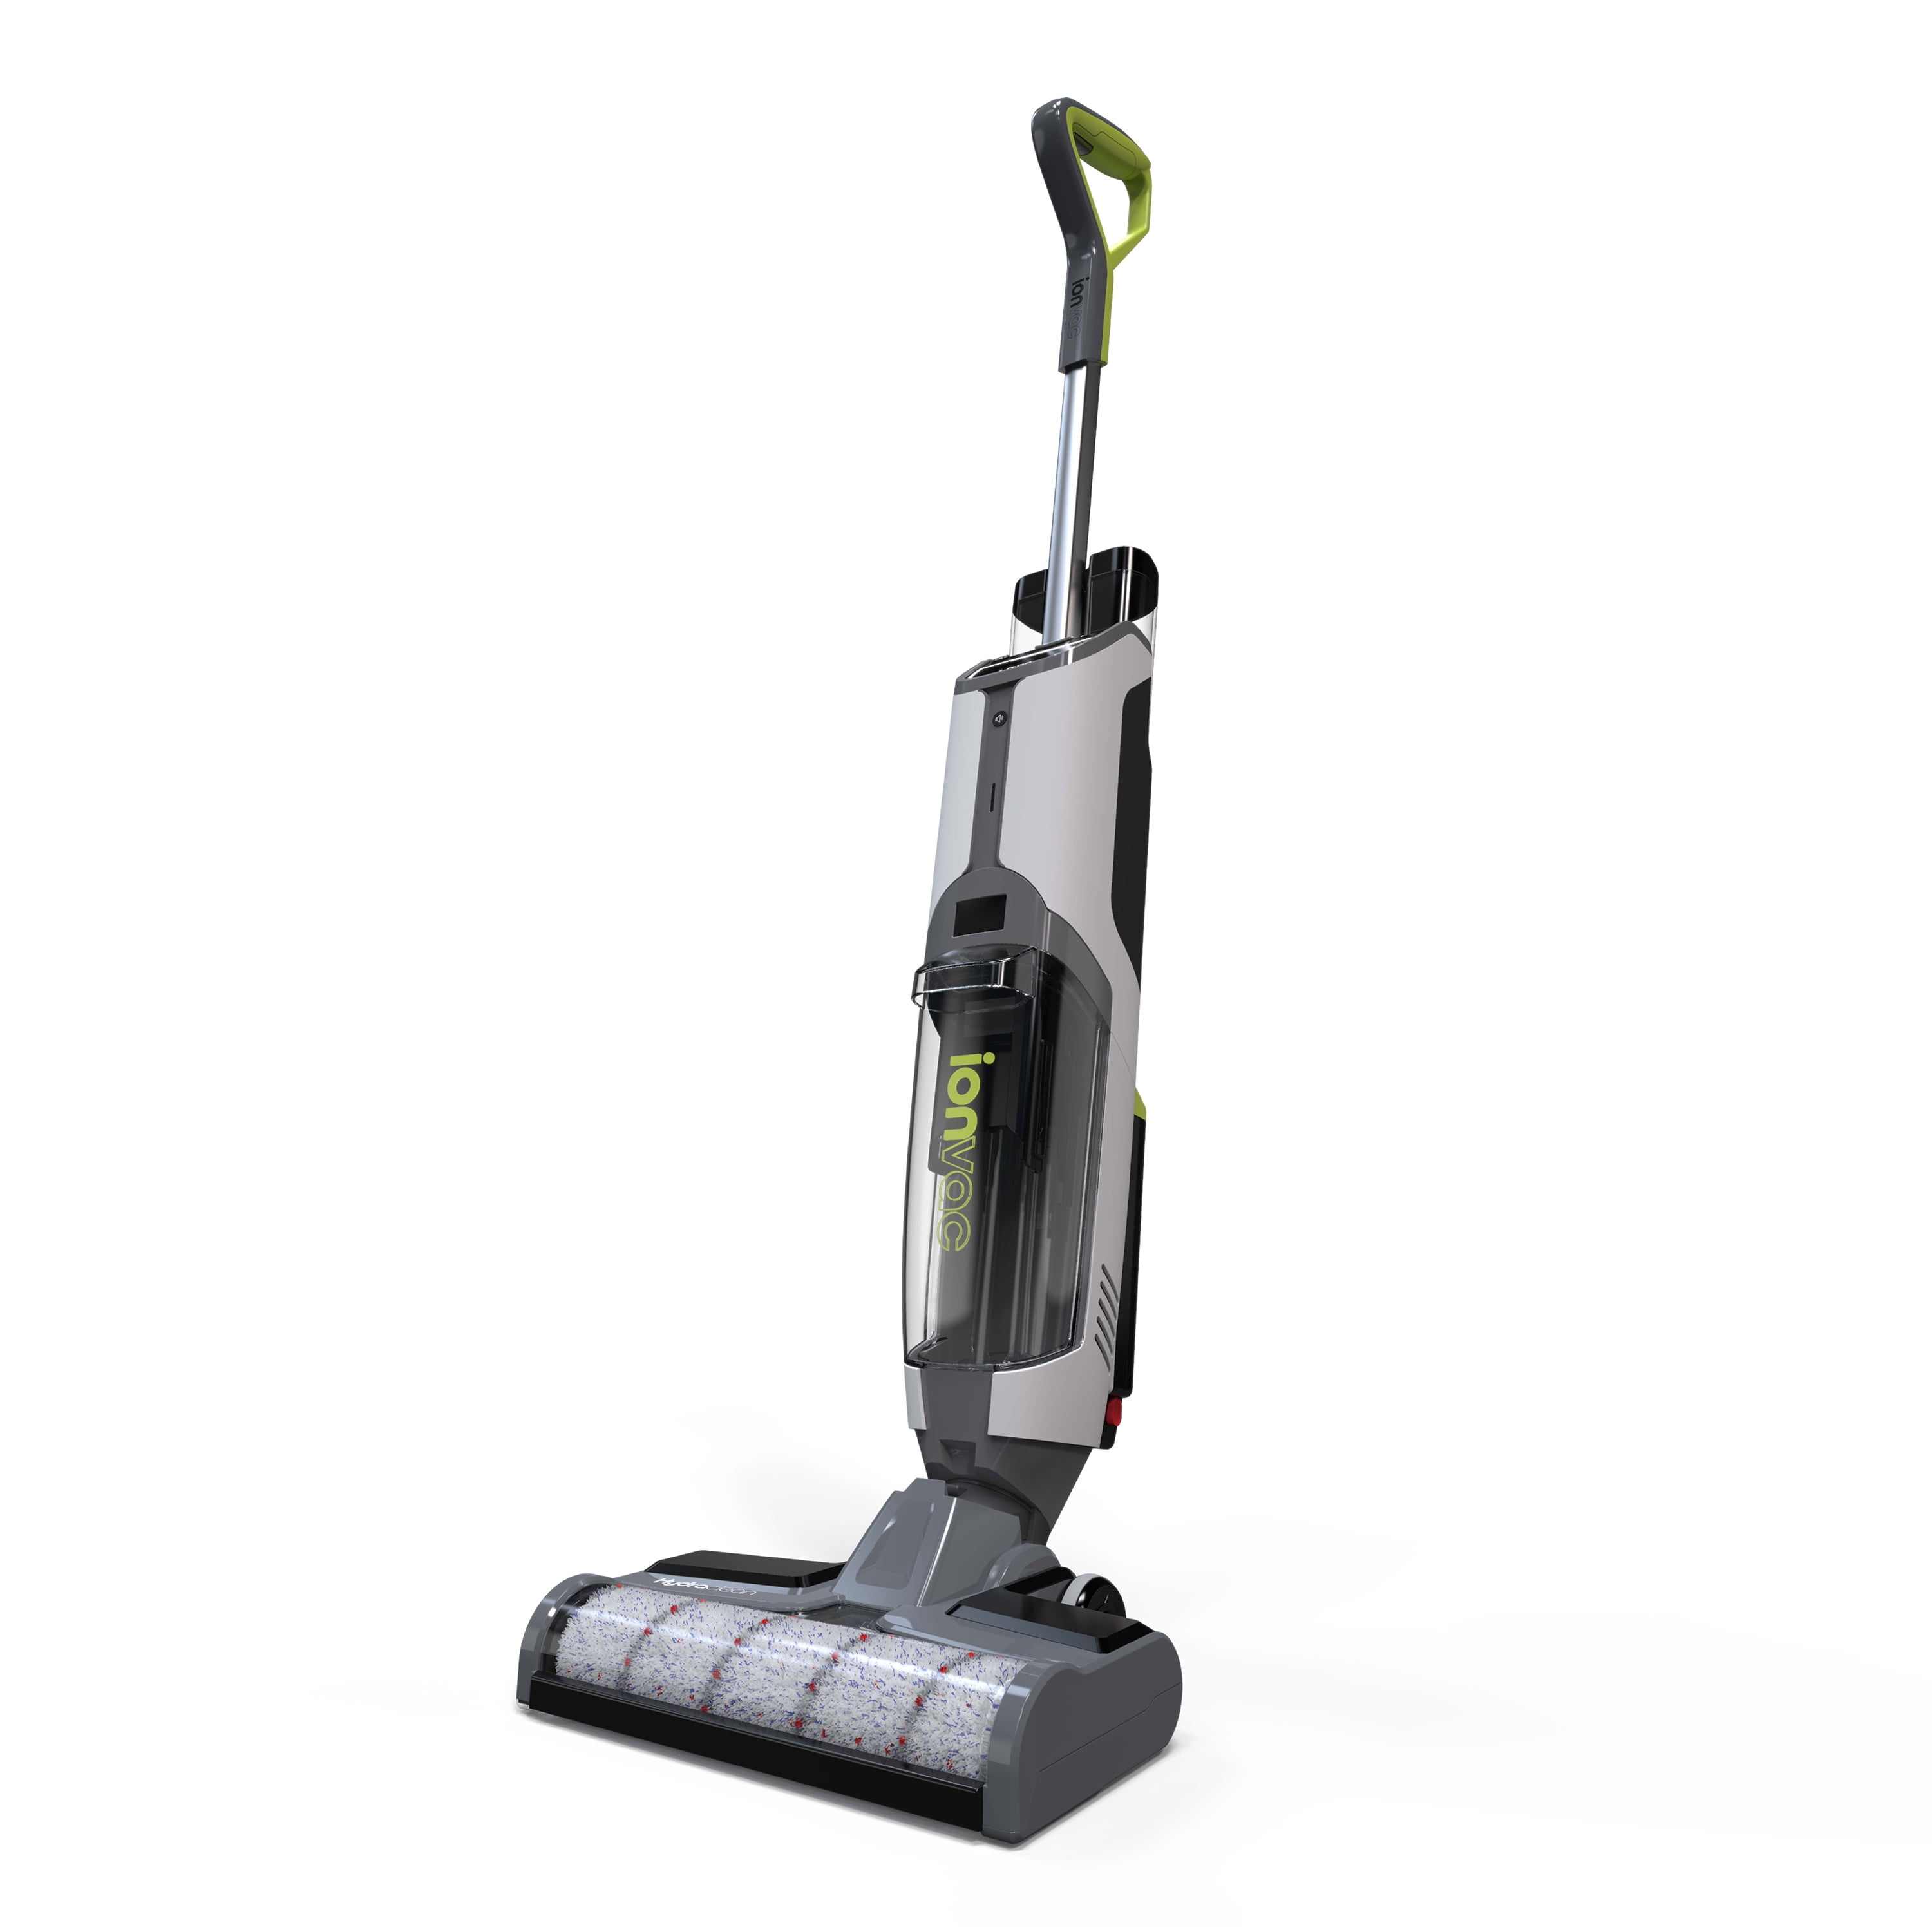 Ionvac Hydraclean Cordless All In One, Best Upright Vacuum Cleaner For Hardwood Floors And Carpet